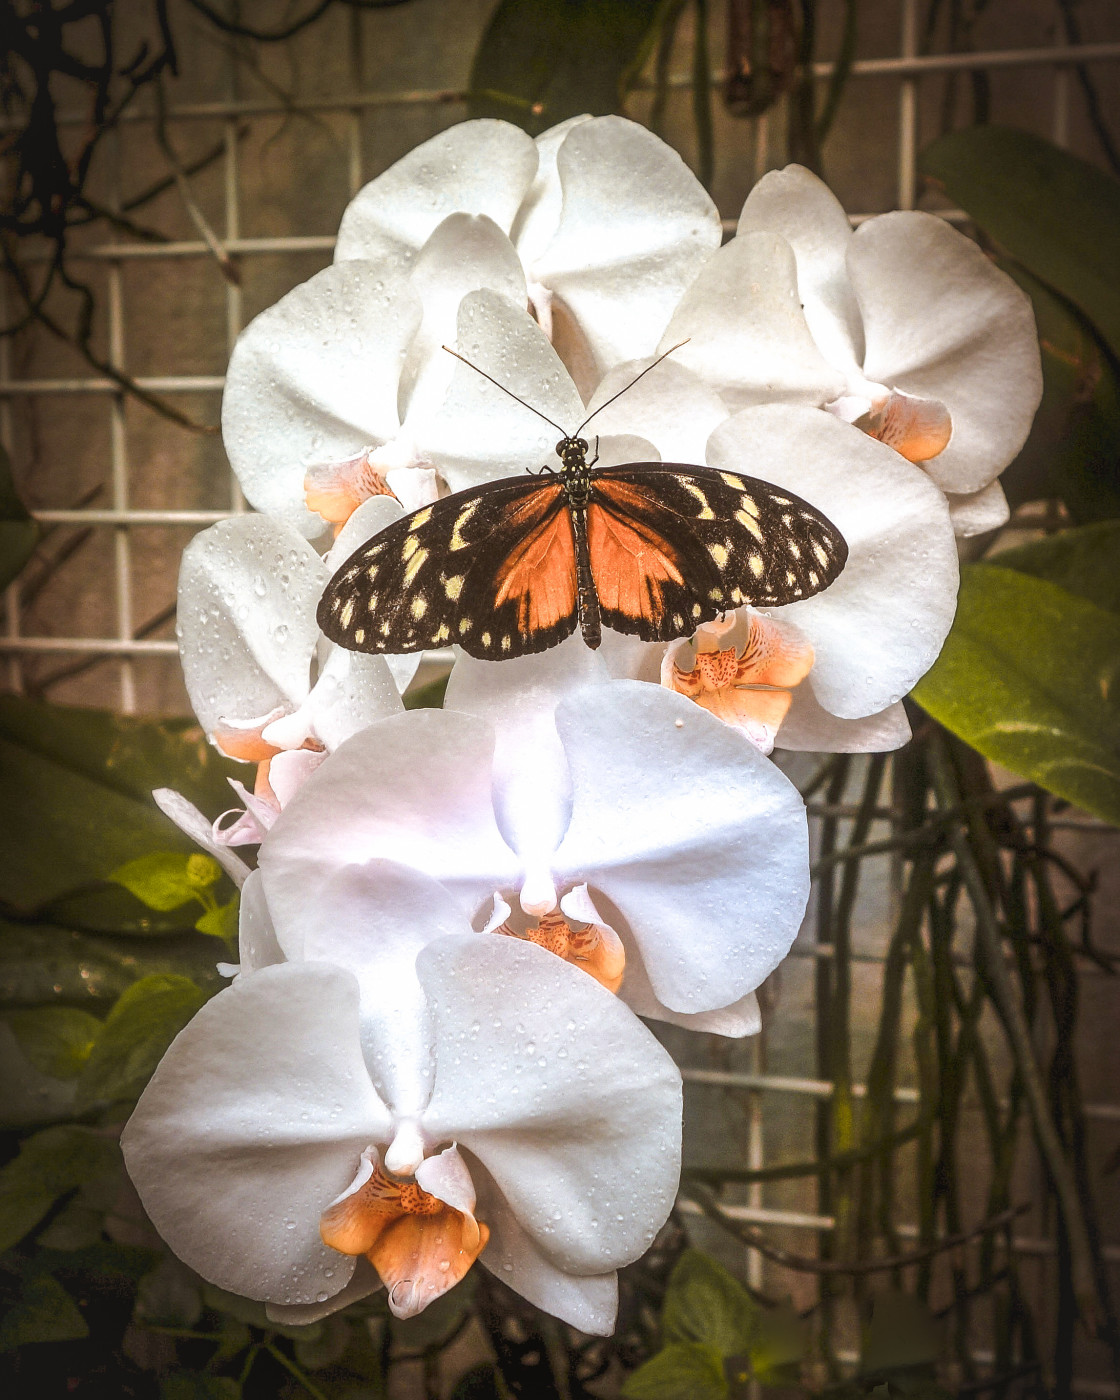 "Butterfly with Orchids" stock image